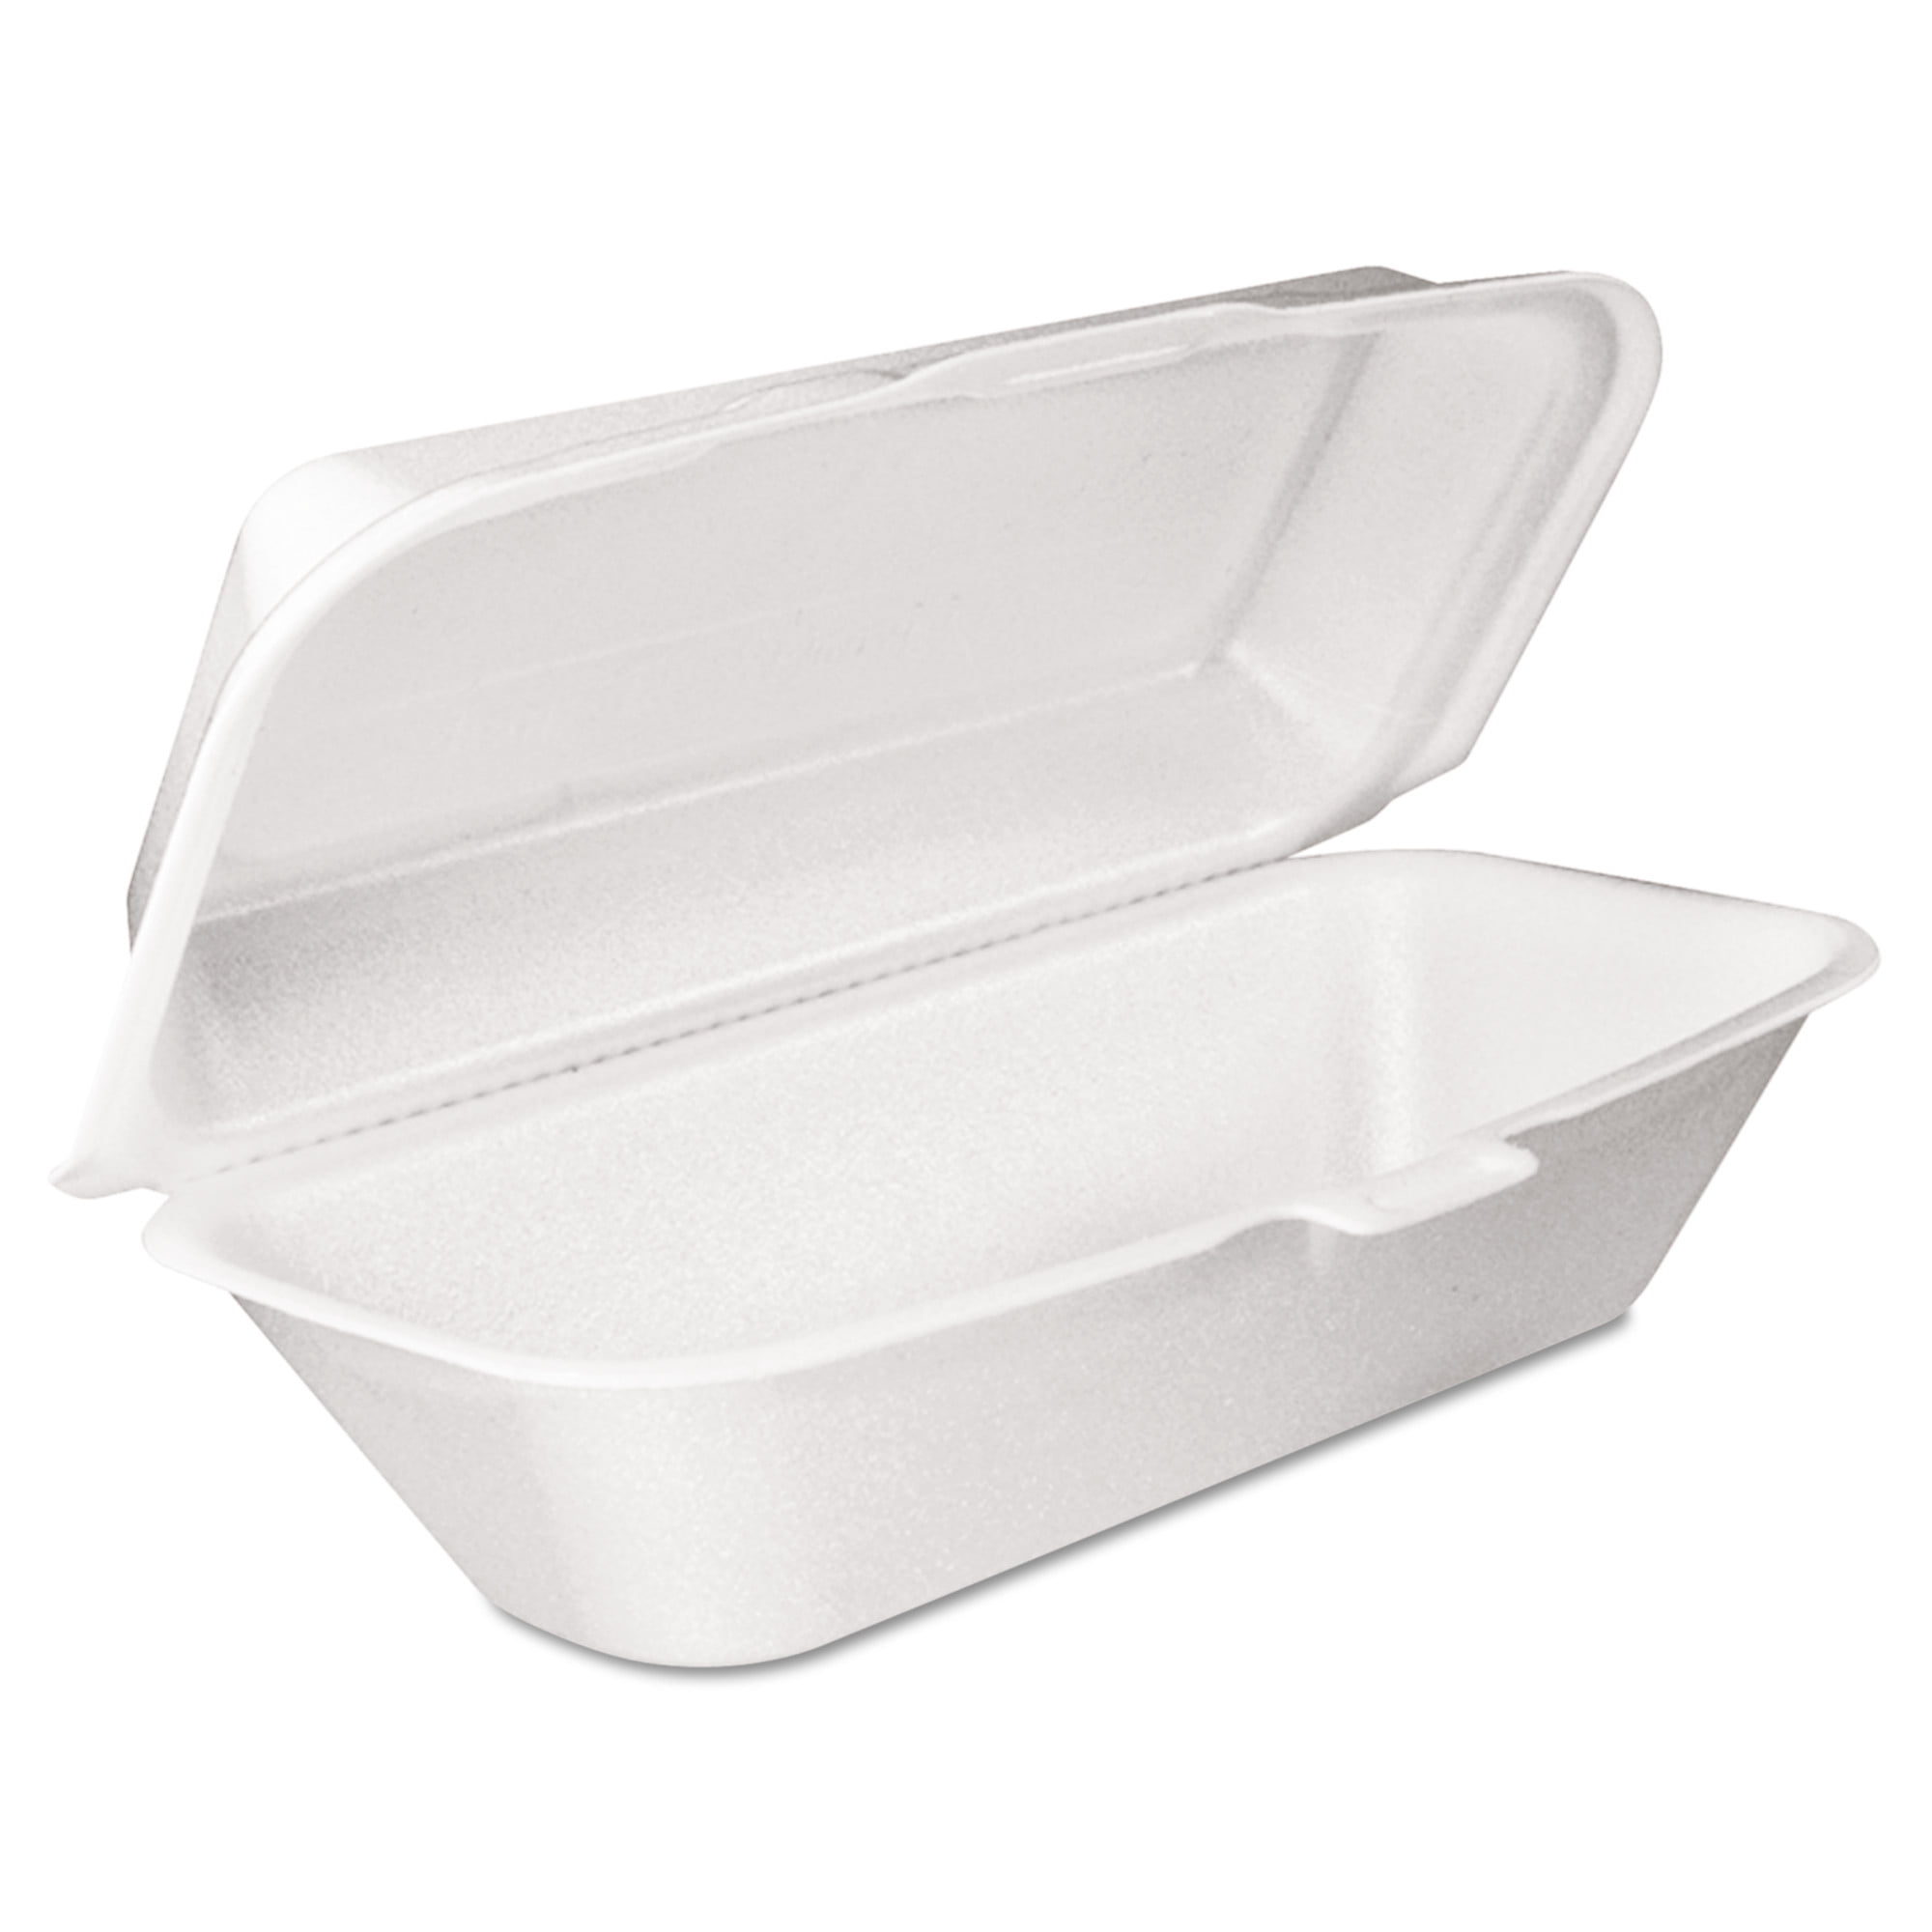 16 oz. Clear Hinged Deli Container - Pak-Man Food Packaging Supply